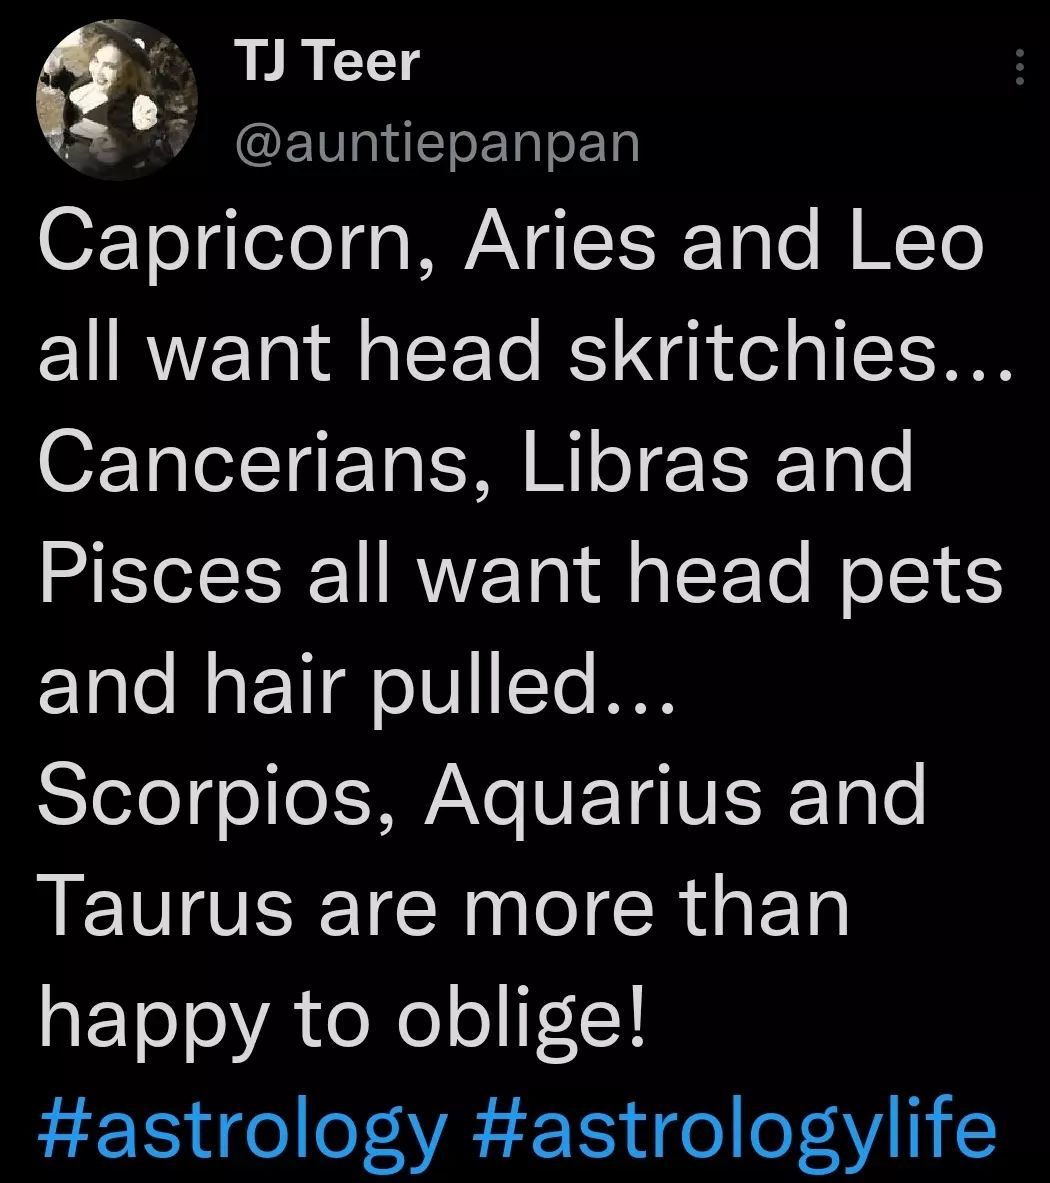 Accurate.
I feel like I should have added to the bottom Scorpio, Aquarius and Taurus are happy to oblige...for a price!!!
Whether its snacks or dinner and a movie. 
Just sayin.
#zenhugz #astrology #astrologylife #horoscopes #horoscope #zodiac #zodiaclife #sasstrology